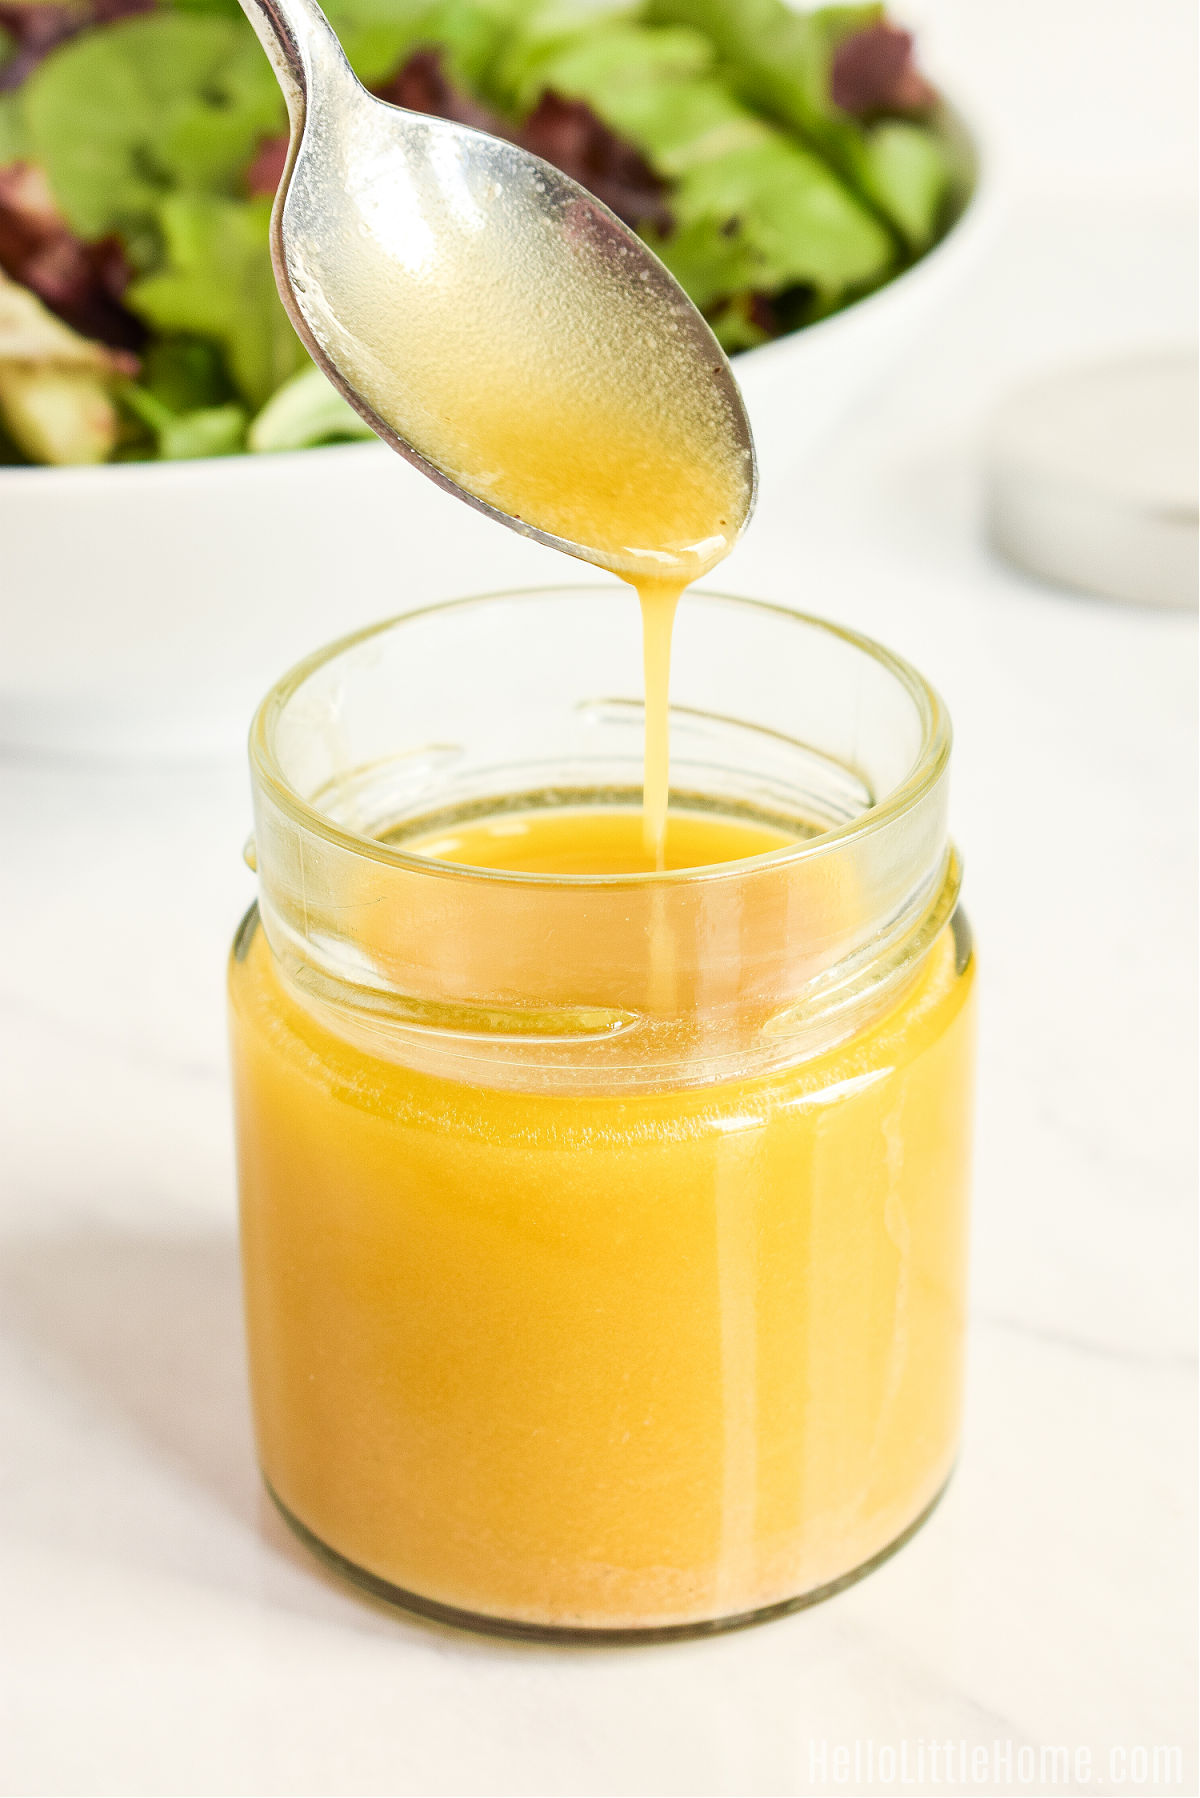 A spoon drizzling the finished vinaigrette into a jar.